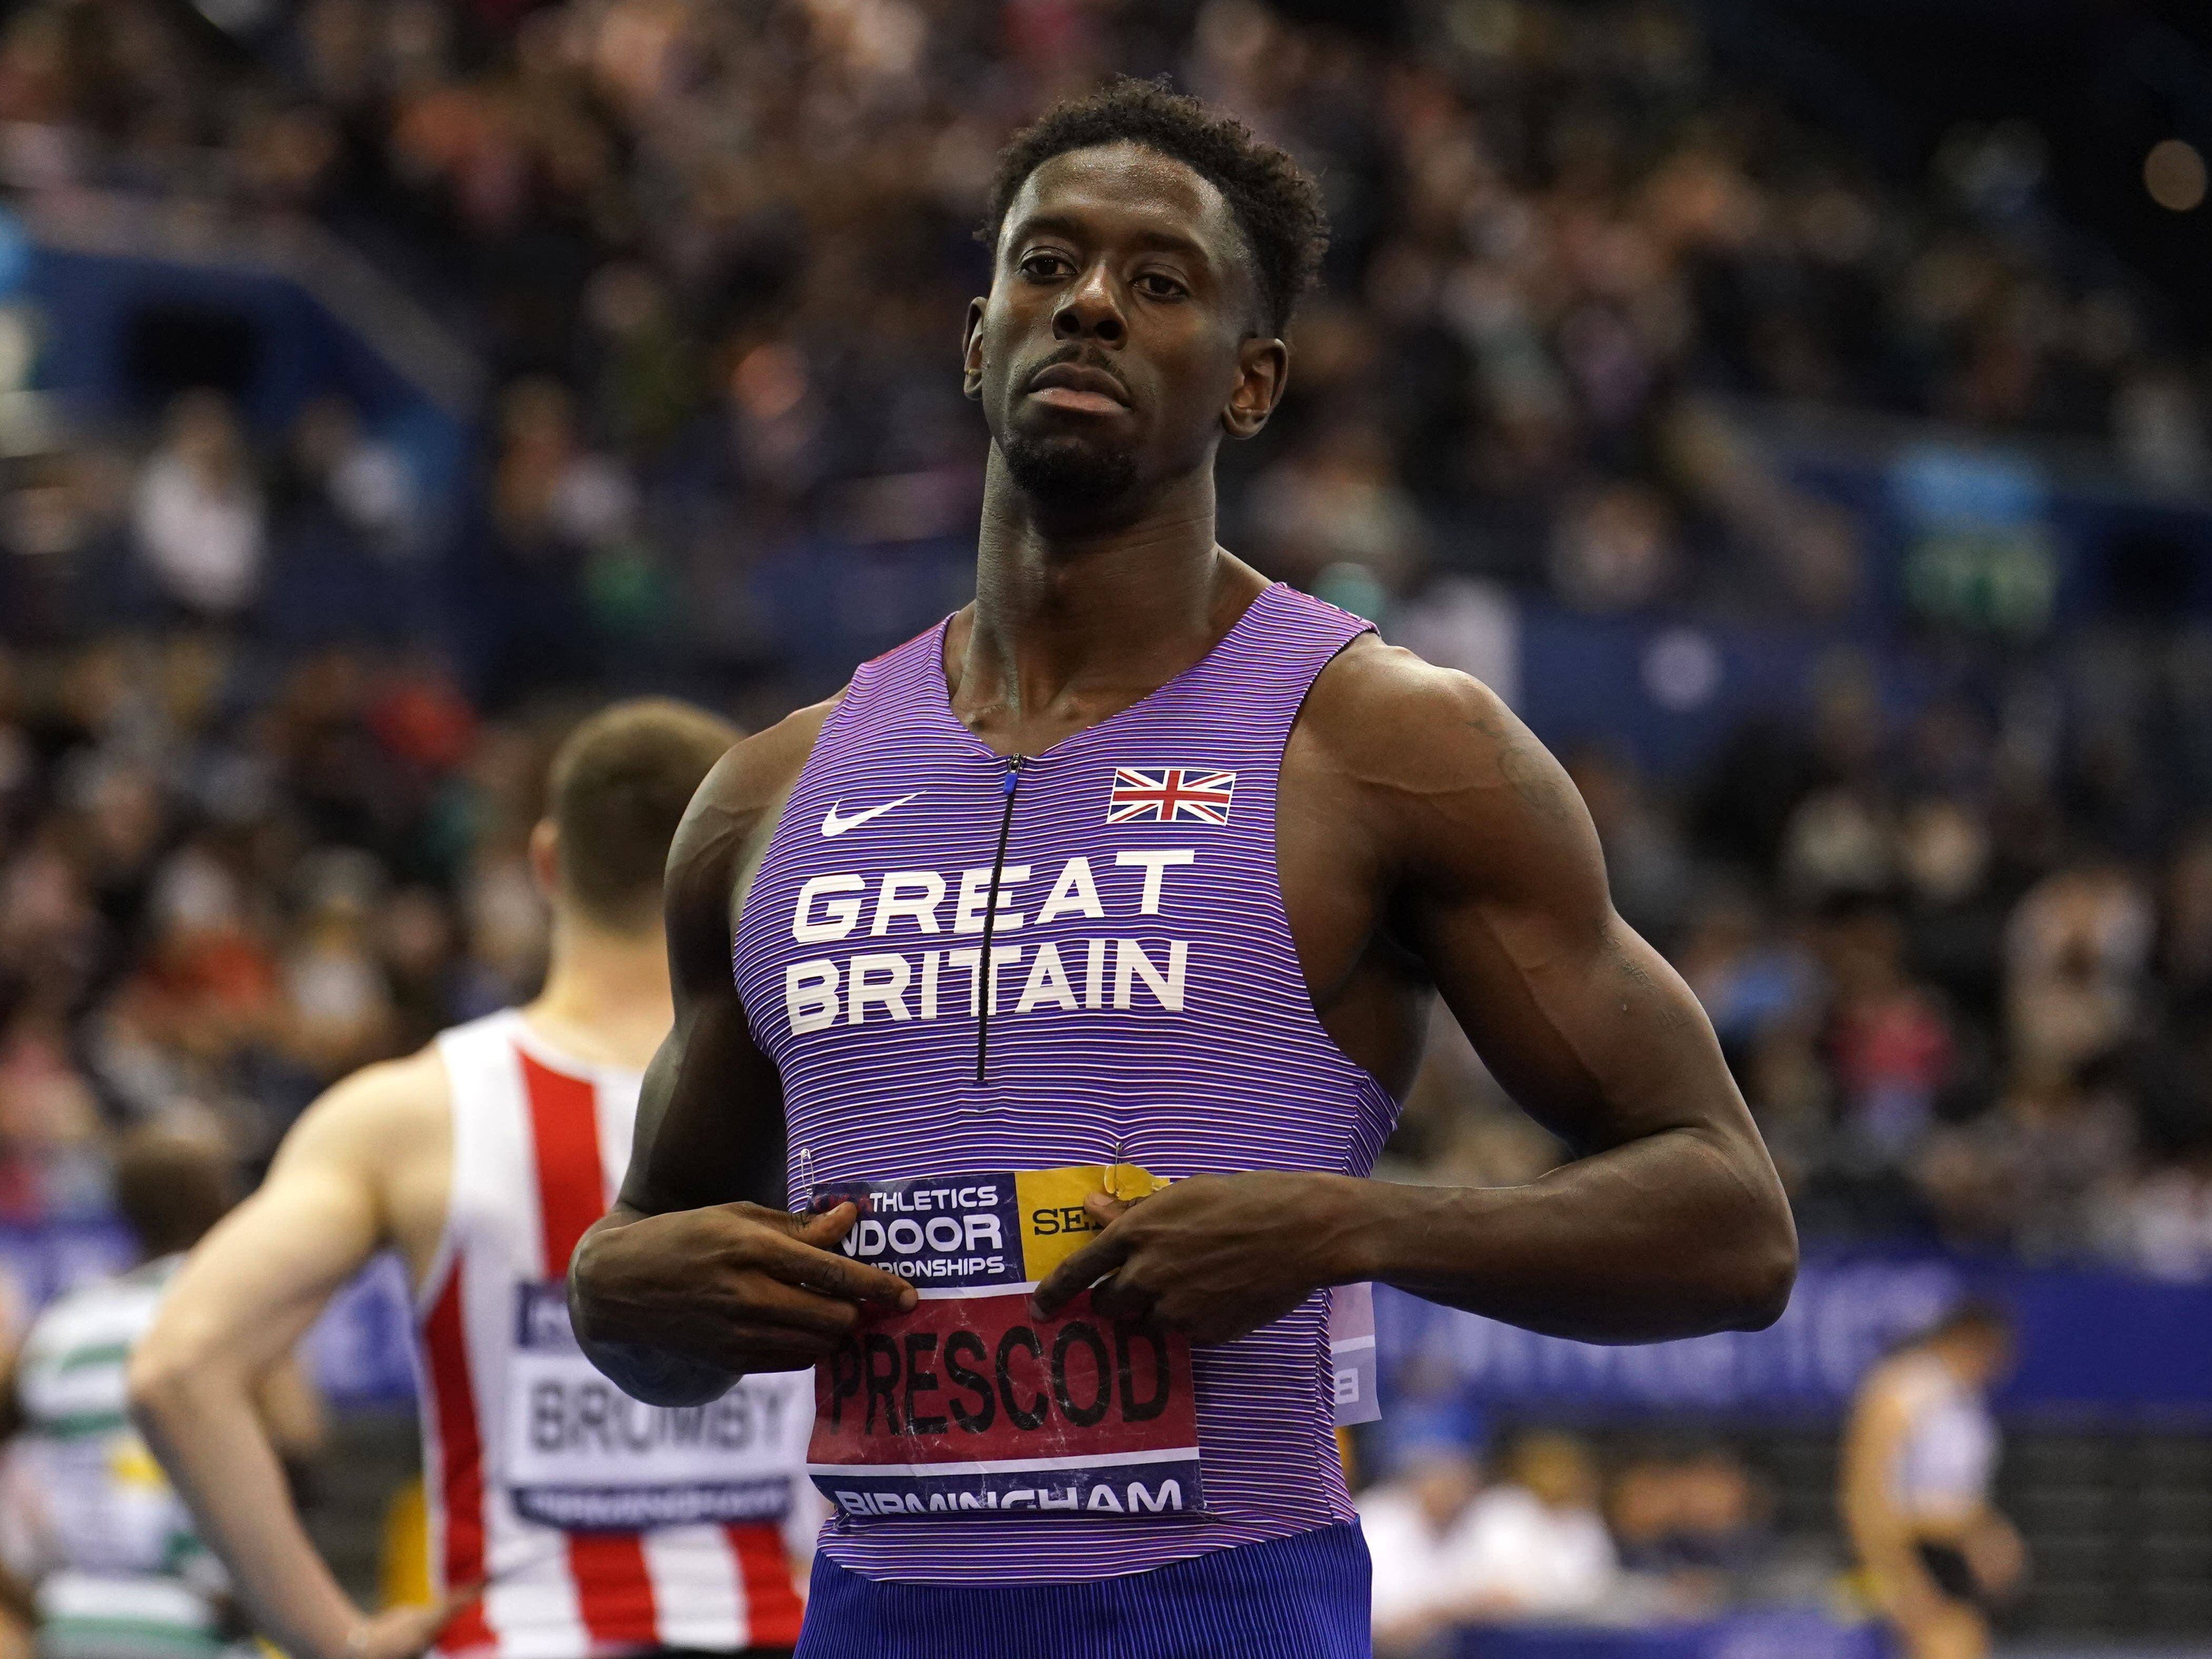 Reece Prescod accuses UK Athletics of ’emotional blackmail’ after withdrawal